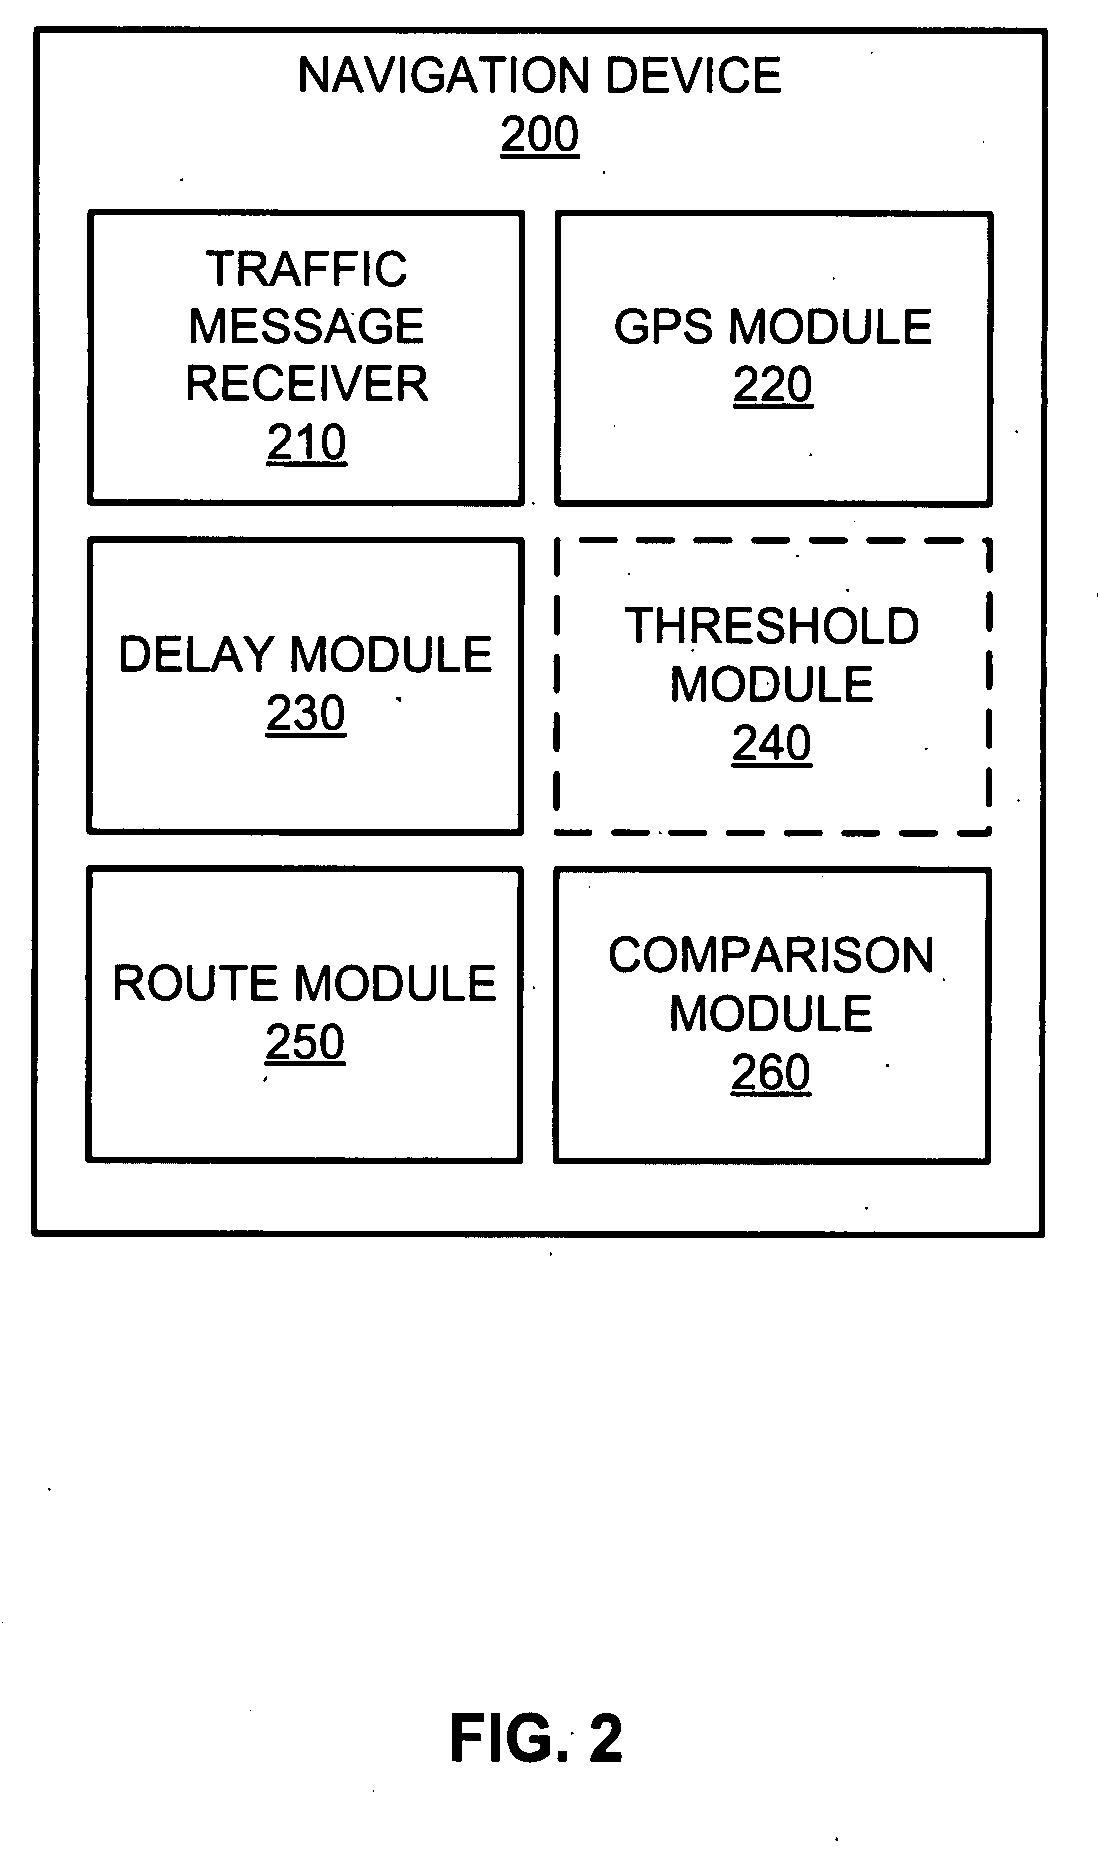 Route calculation based on traffic events